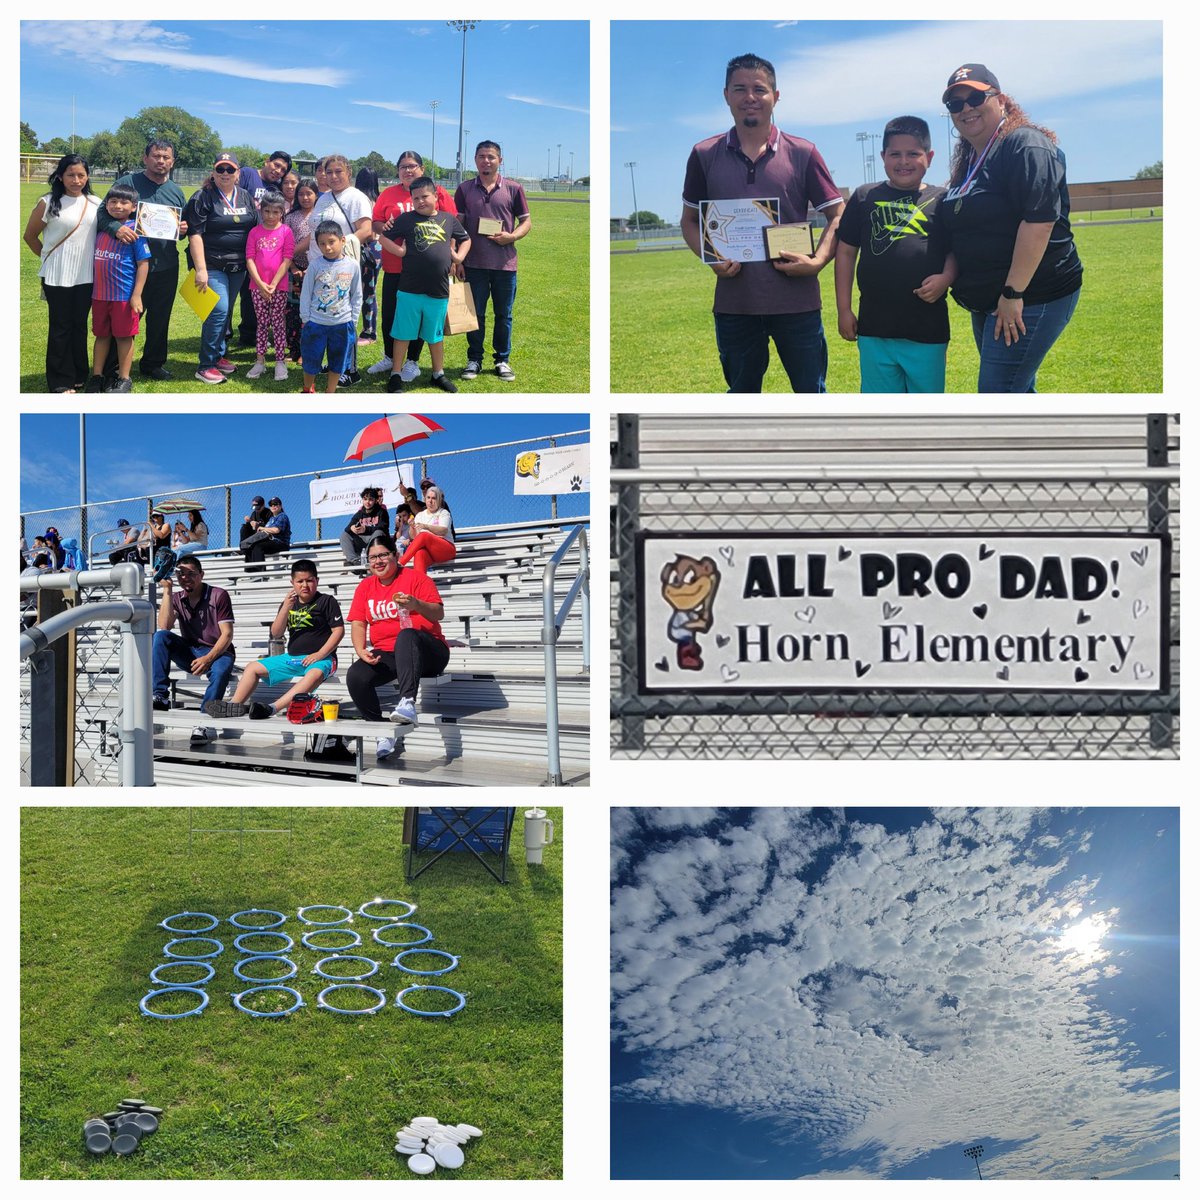 Today was a beautiful, fun, and special All-Star All Pro-Dad game day. Thank you, @Horn_Dream_Big, families for coming and for your commitment with your children. @Alief_Fame @AliefISD @AllProDad